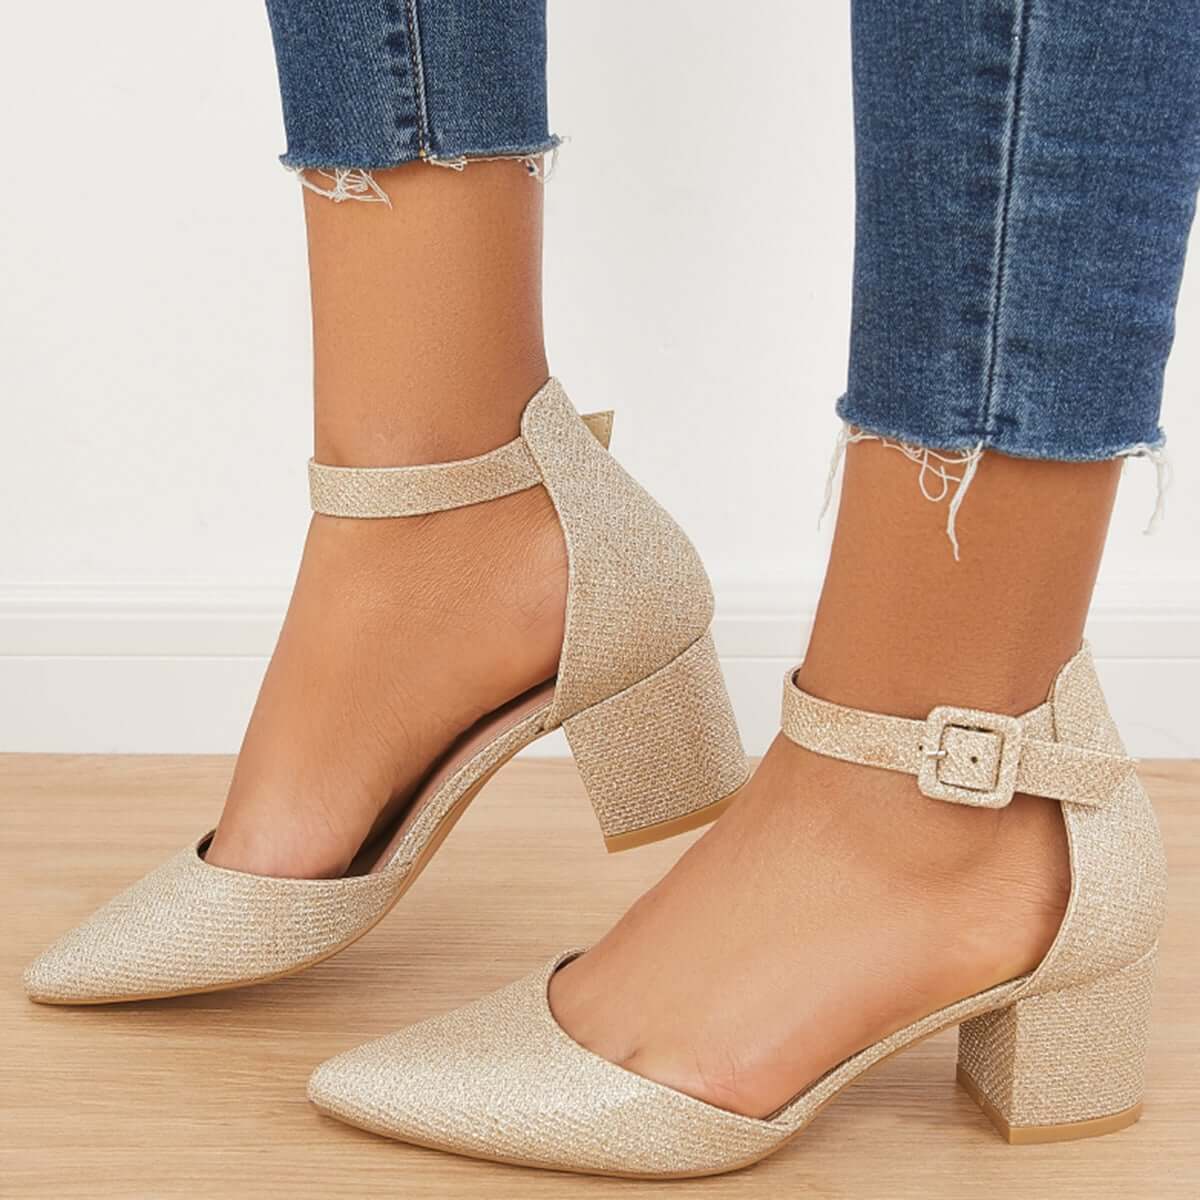 Cosypairs Low Chunky Block Heel Pumps Pointed Toe Ankle Strap Heels